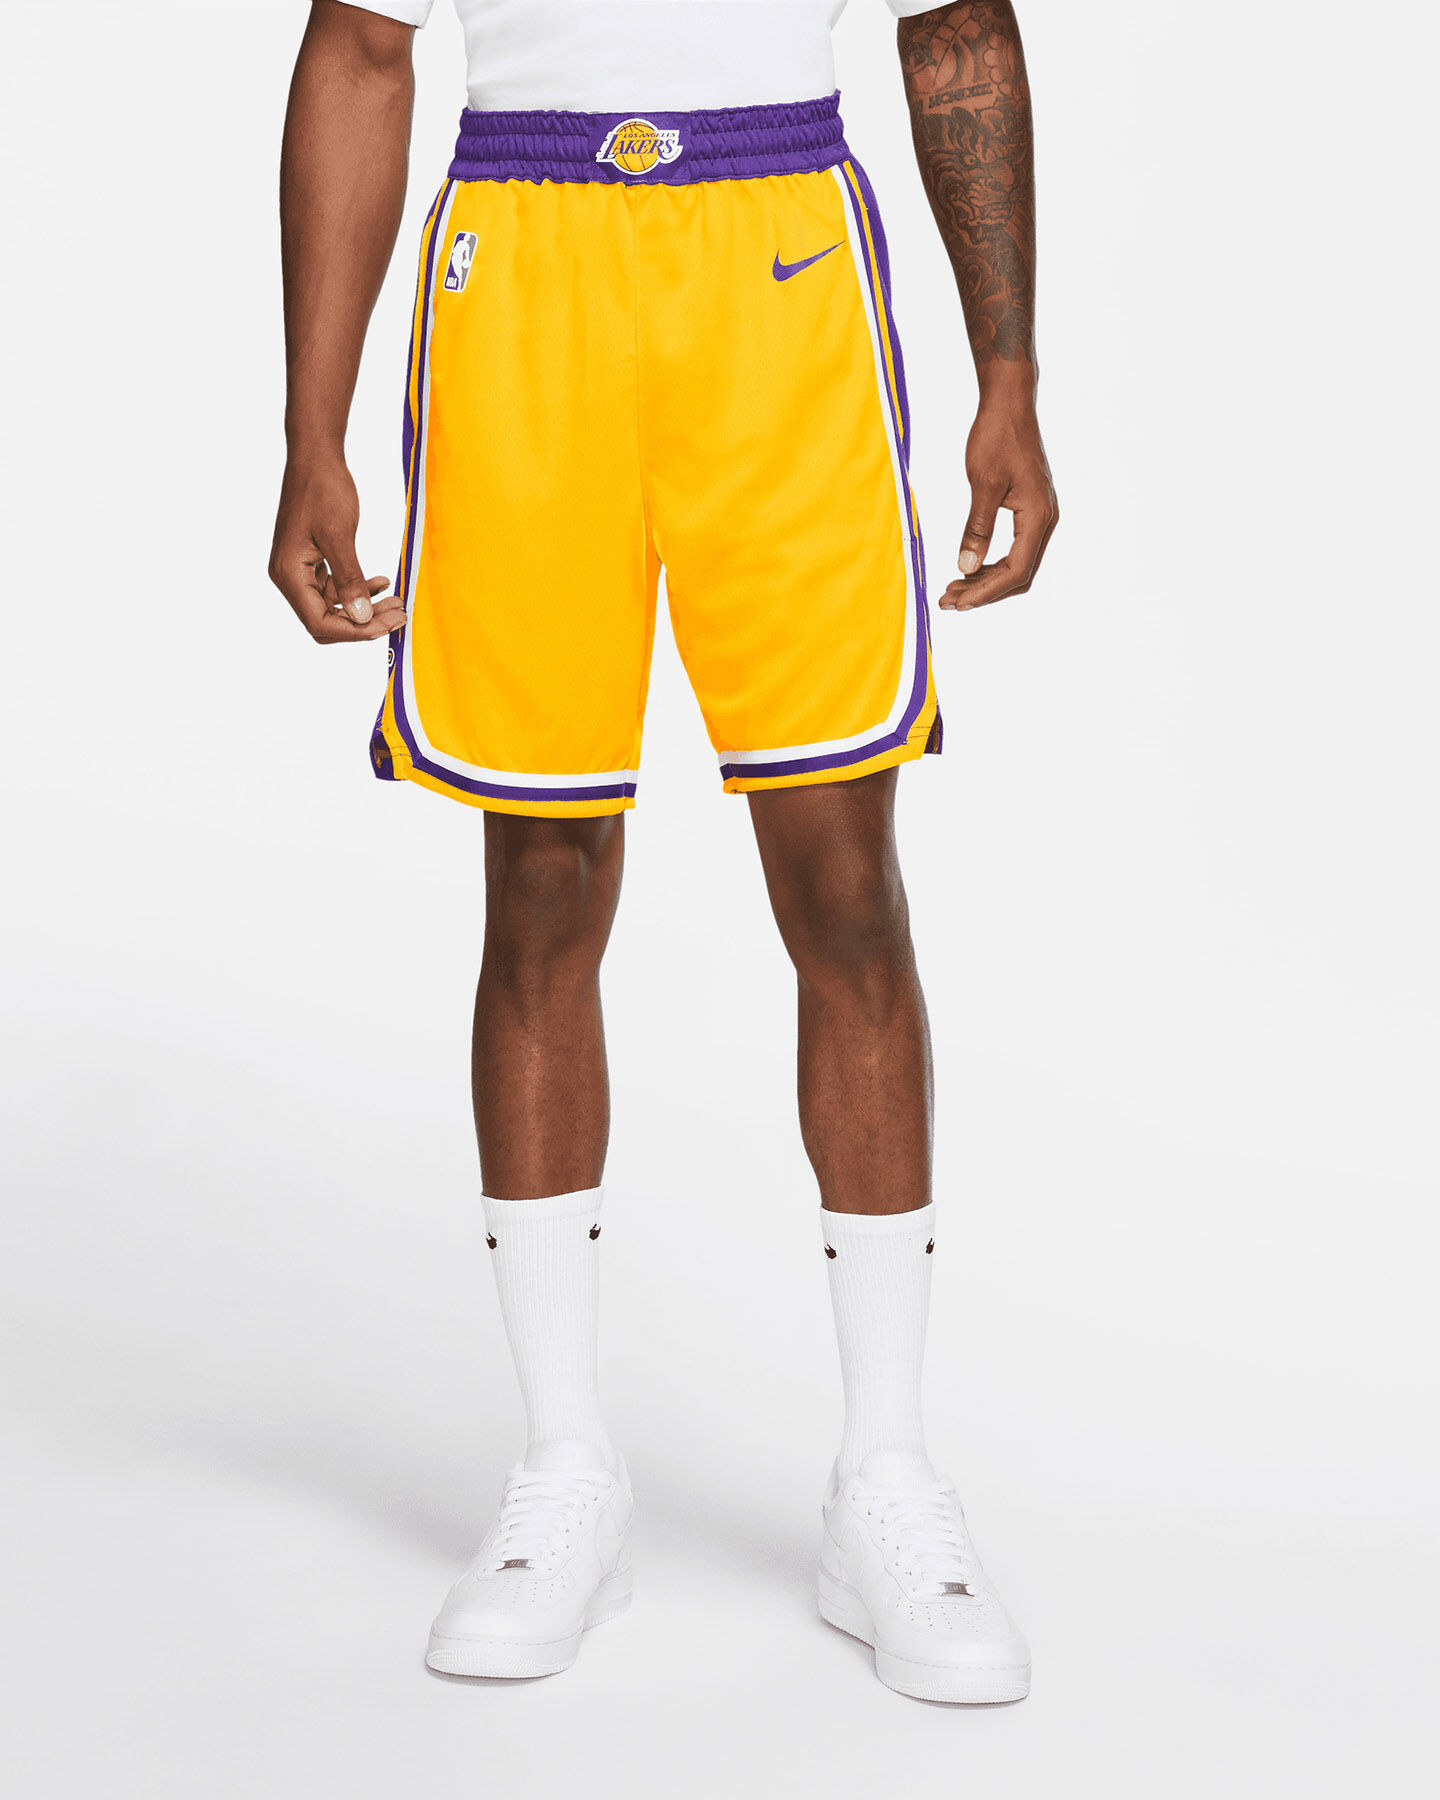  Pantaloncini basket NIKE LOS ANGELES LAKERS M S4046590|728|S scatto 3